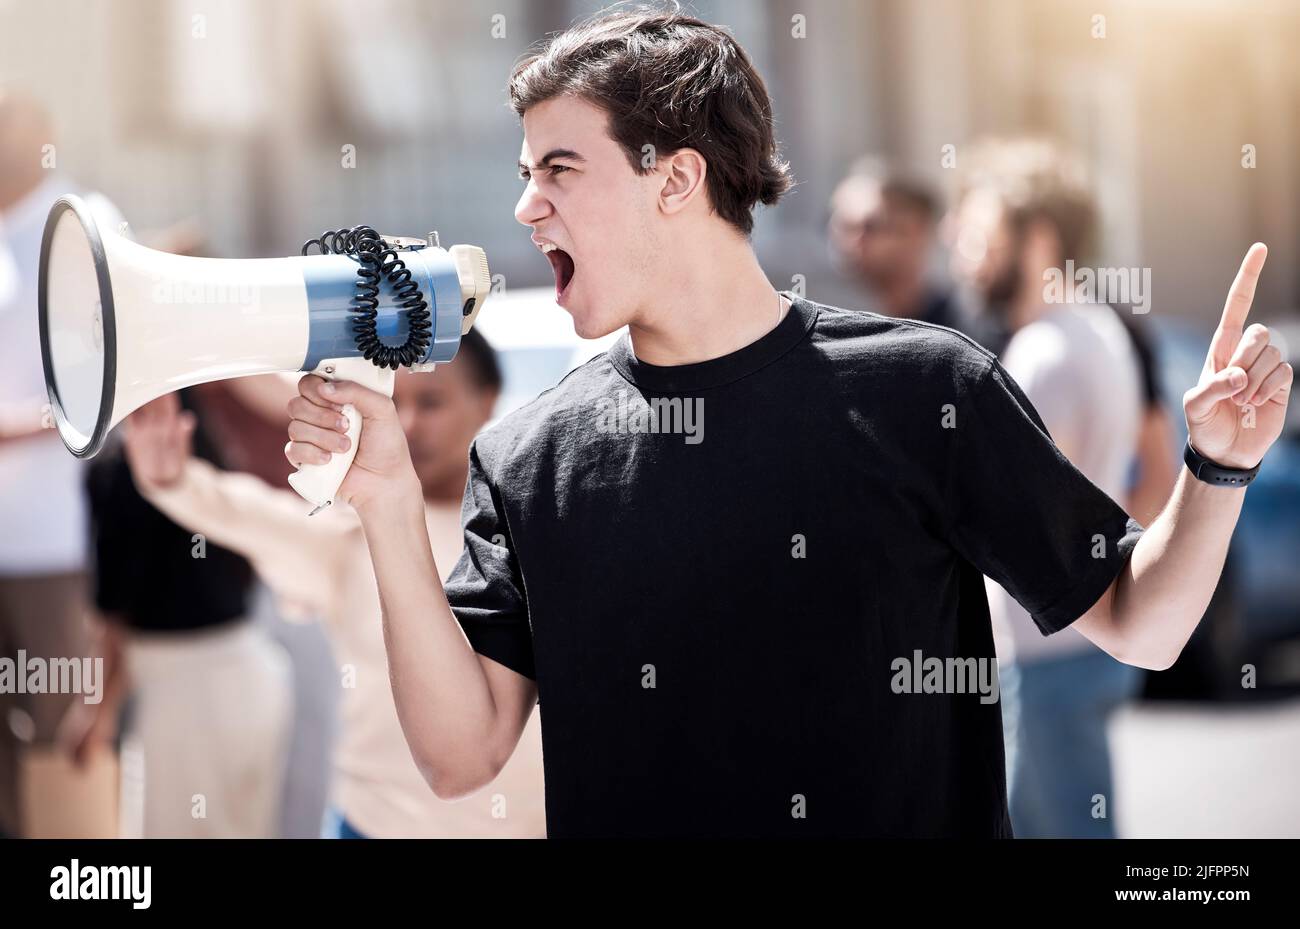 We will not be silenced. Shot of a young man yelling through a megaphone during a protest. Stock Photo